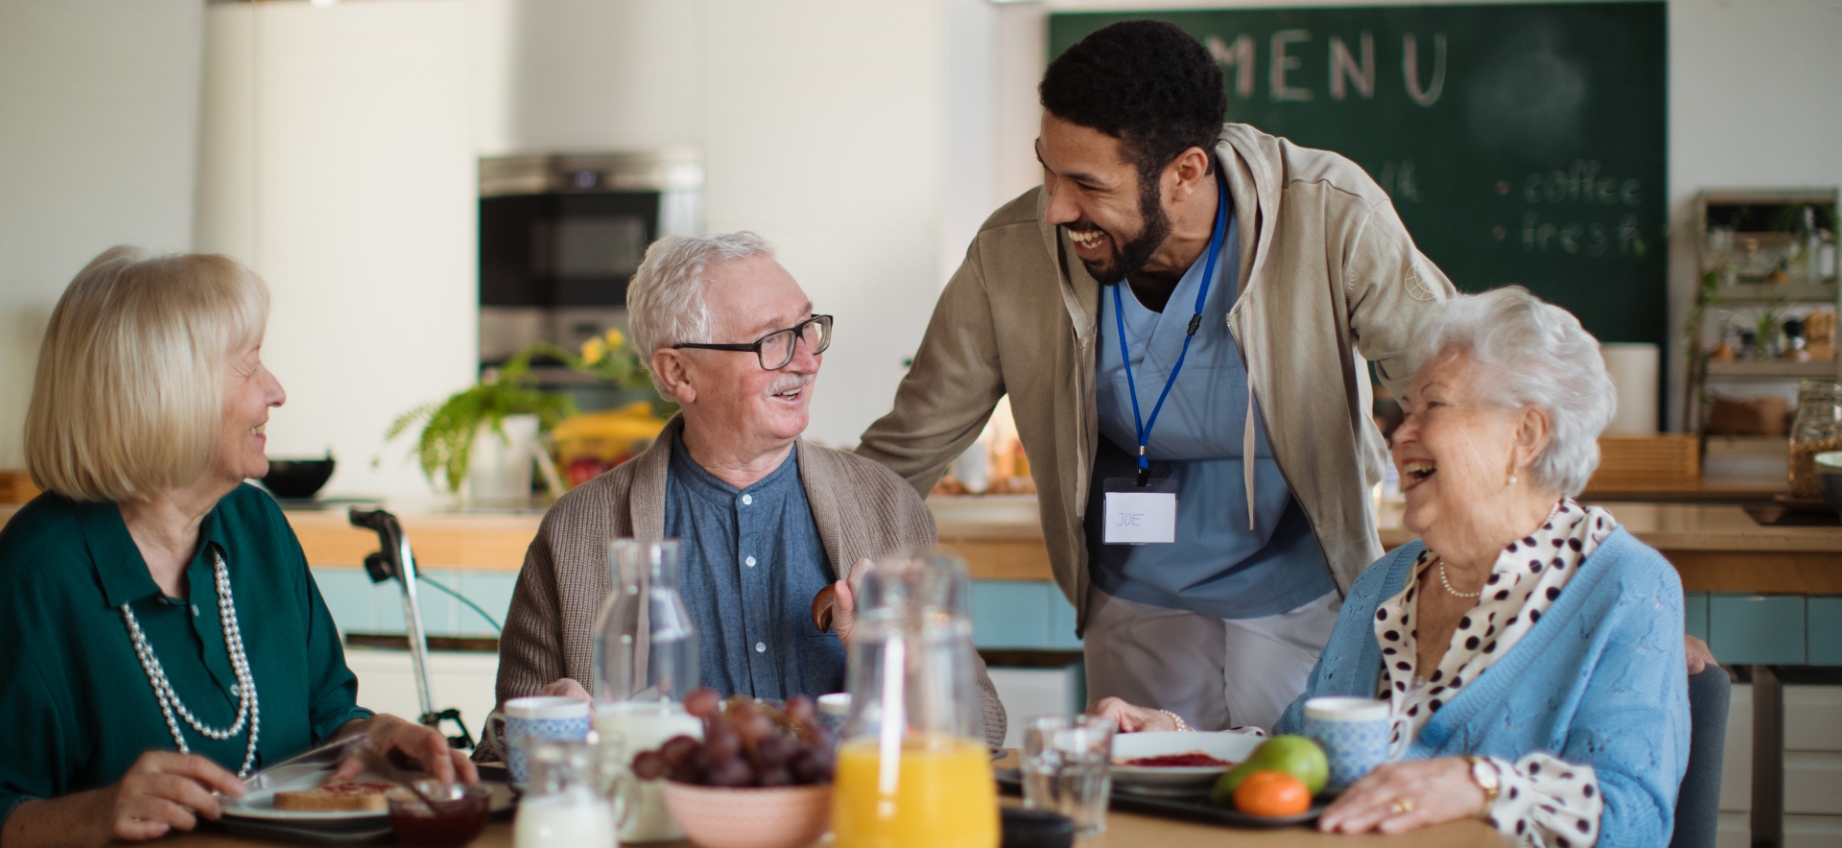 elderly people sitting around a table having breakfast. Male nurse laughing and in conversation with the elderly people.